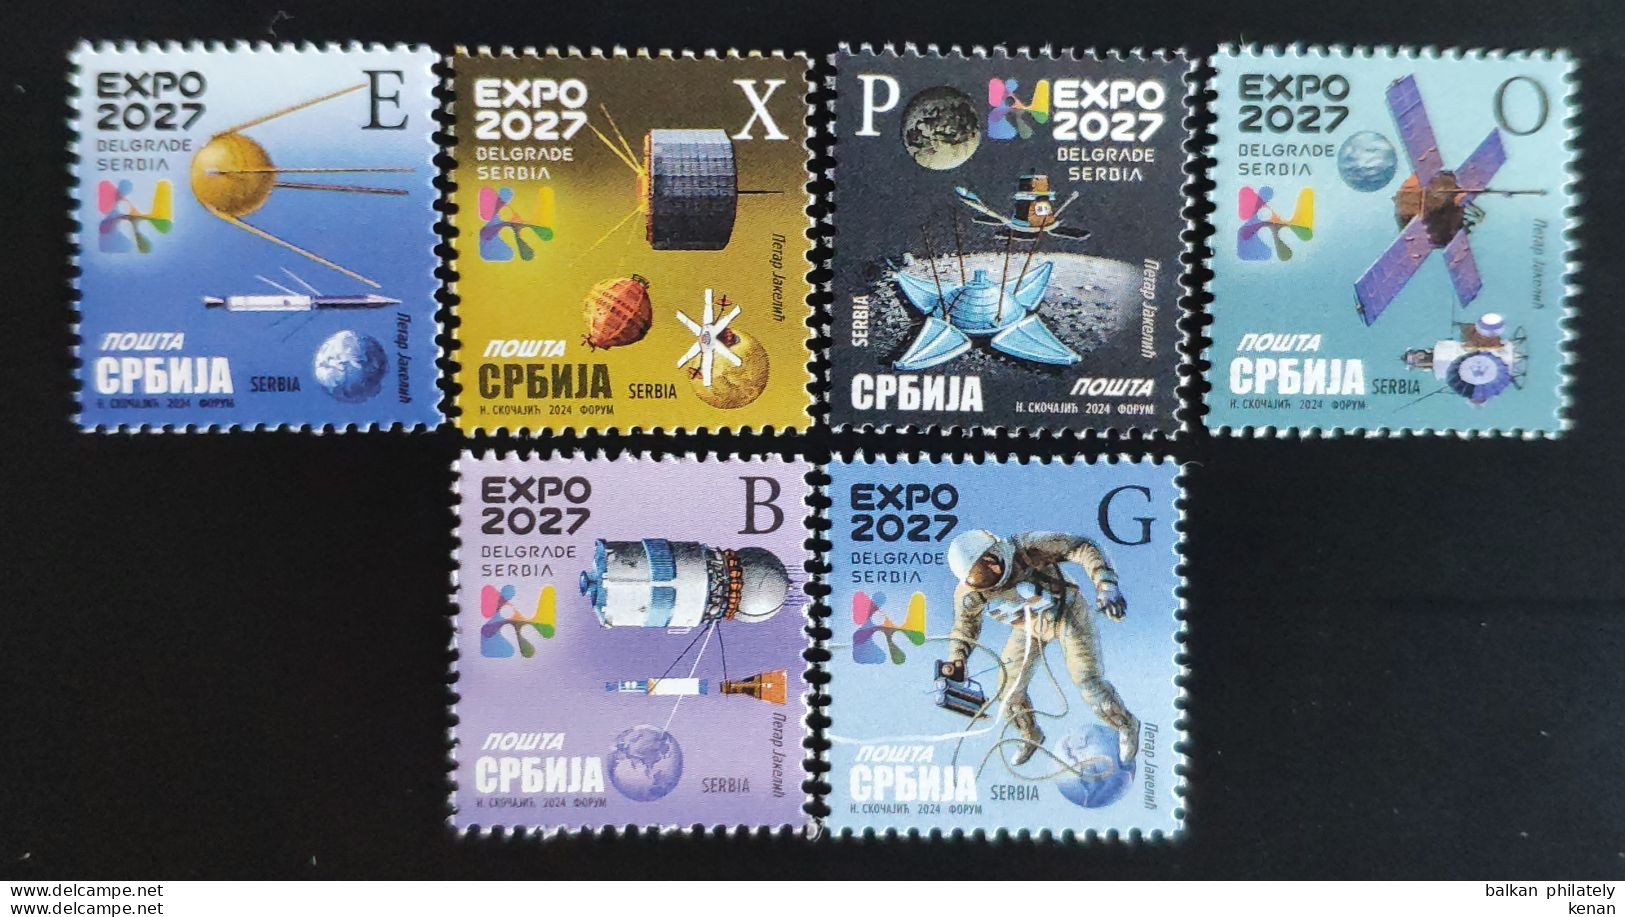 Serbia, 2024, Definitive Stamps, EXPO 2027 (MNH) - Serbia